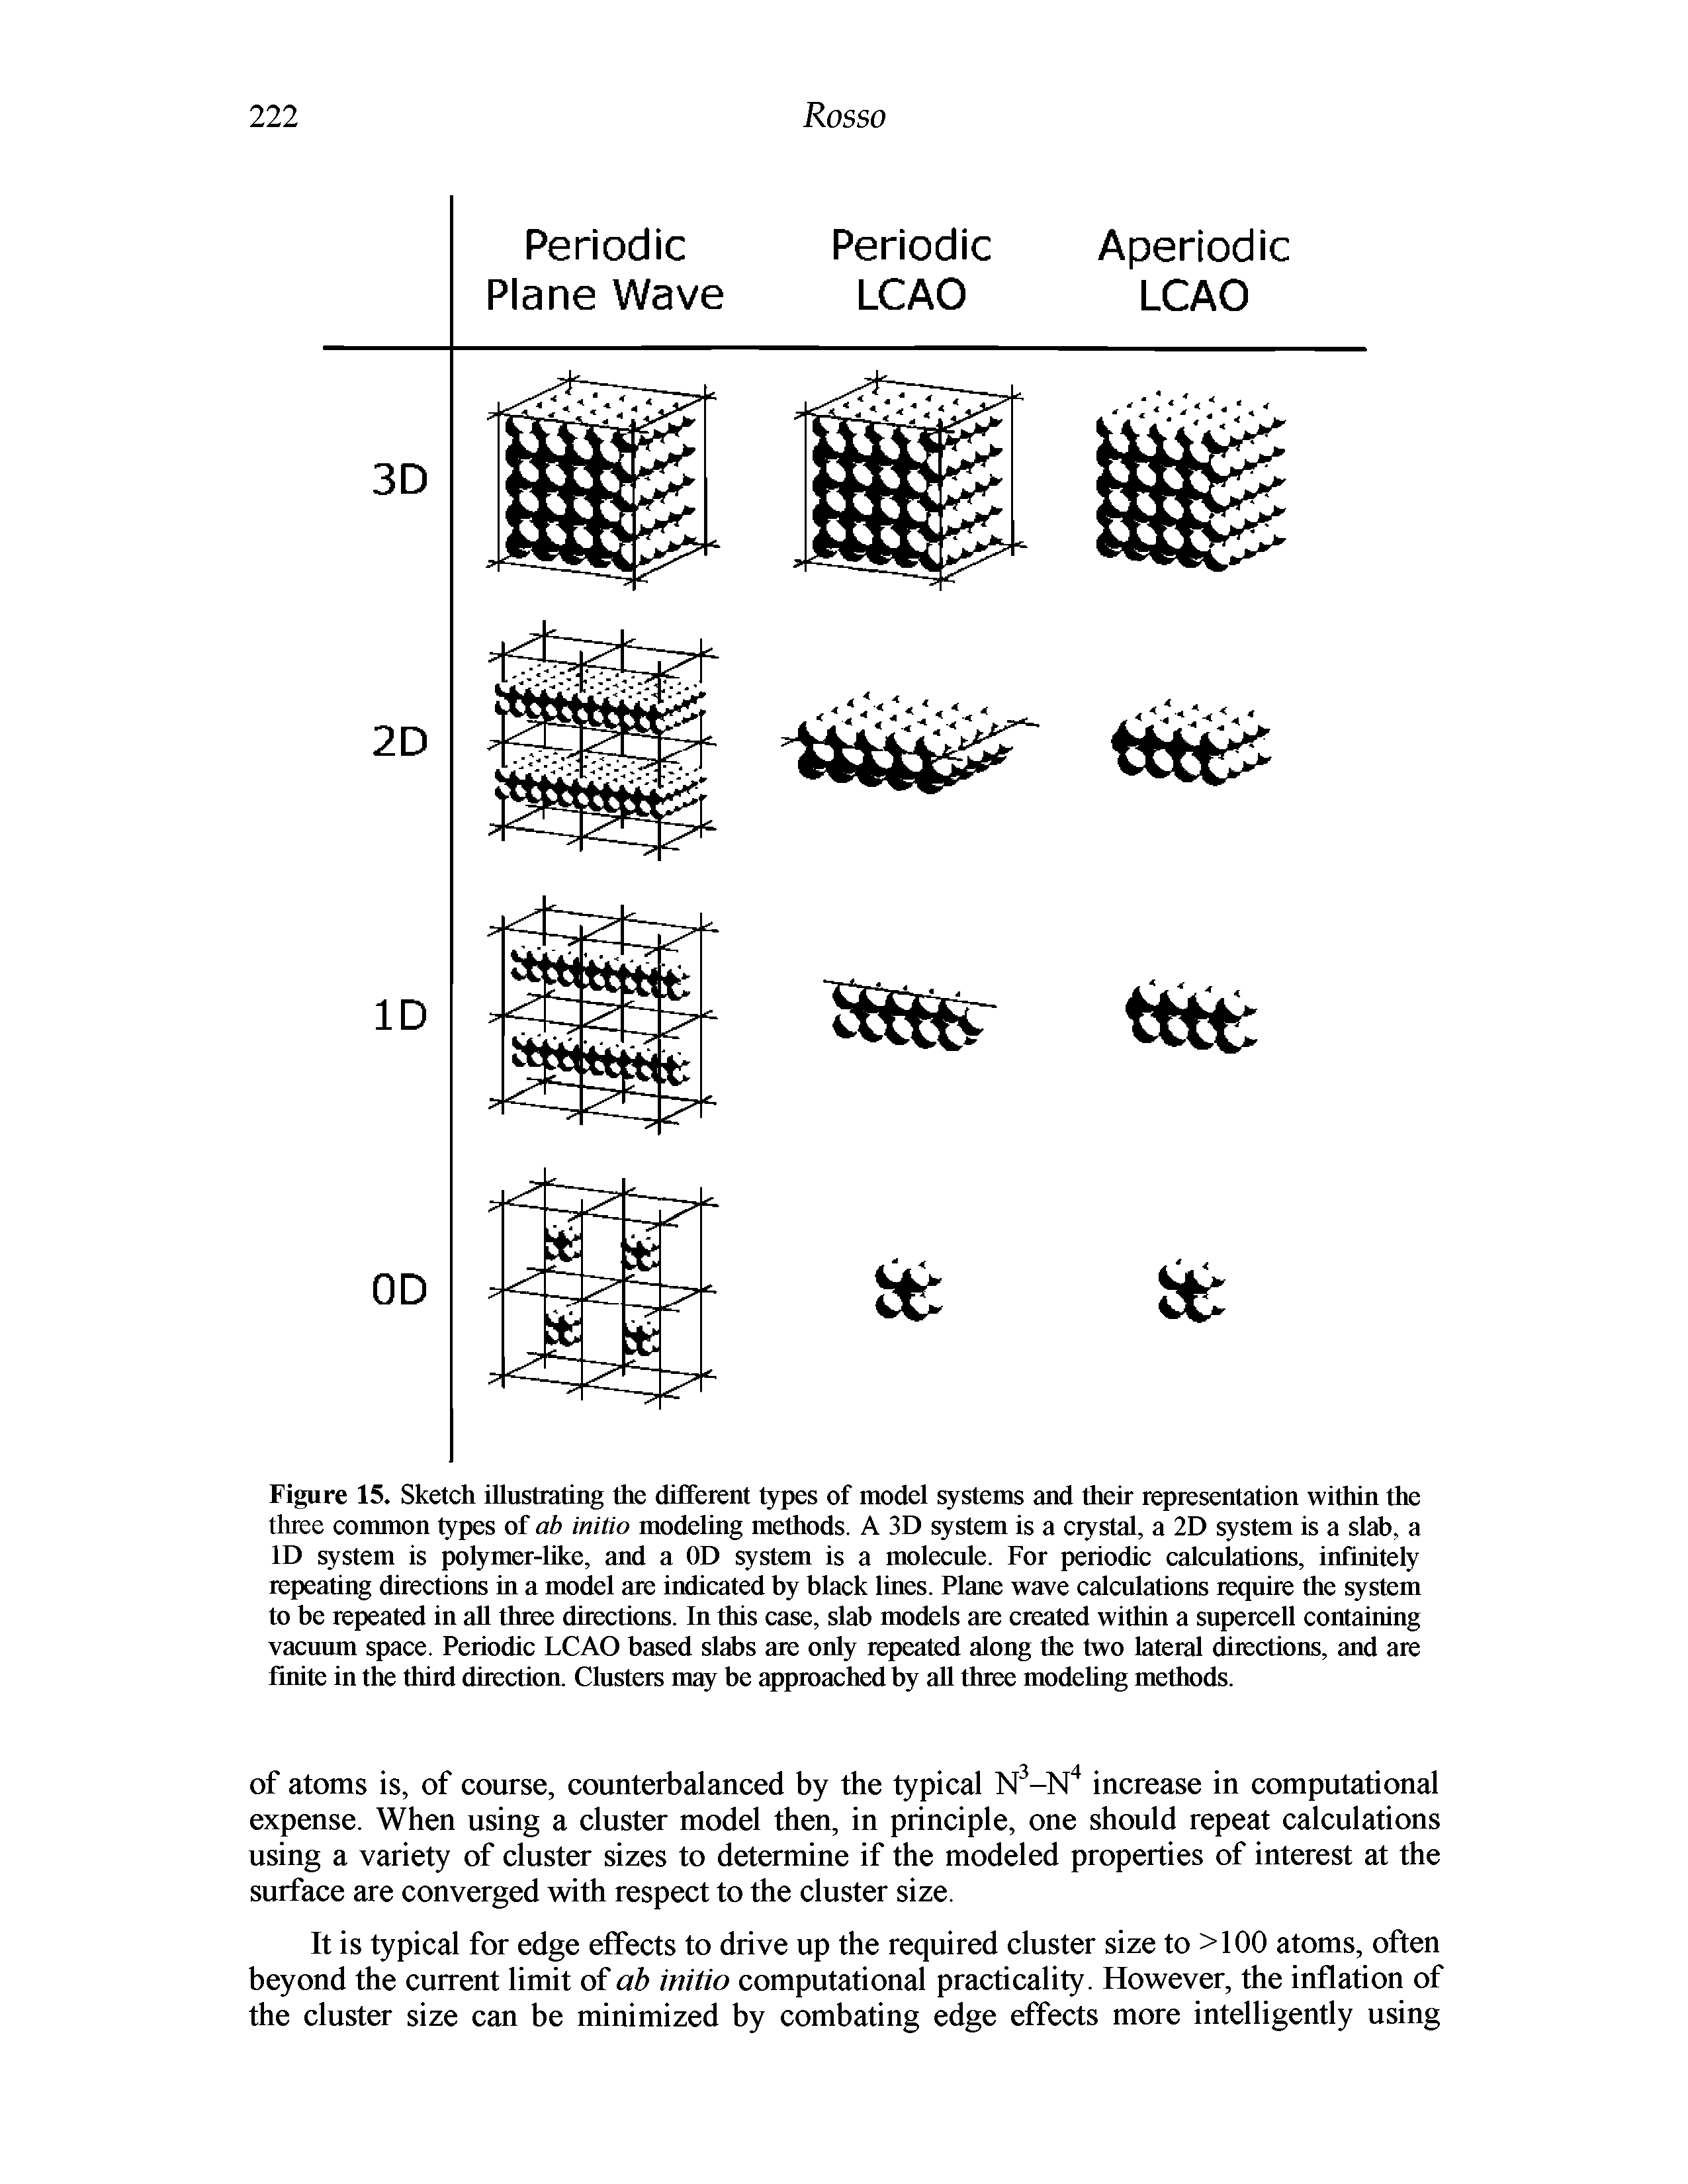 Figure 15. Sketch illustrating the different types of model systems and their representation within the three common types of ab initio modeling methods. A 3D system is a crystal, a 2D system is a slab, a ID system is polymer-like, and a OD system is a molecule. For periodic calculations, infinitely repeating directions in a model are indicate by black lines. Plane wave calculations require the system to be repeated in all three directions. In this case, slab models are created within a supercell containing vacuum space. Periodic LCAO based slabs are oidy repeated along the two lateral directions, and are finite in the third direction. Clusters may be approached by all three modehng methods.